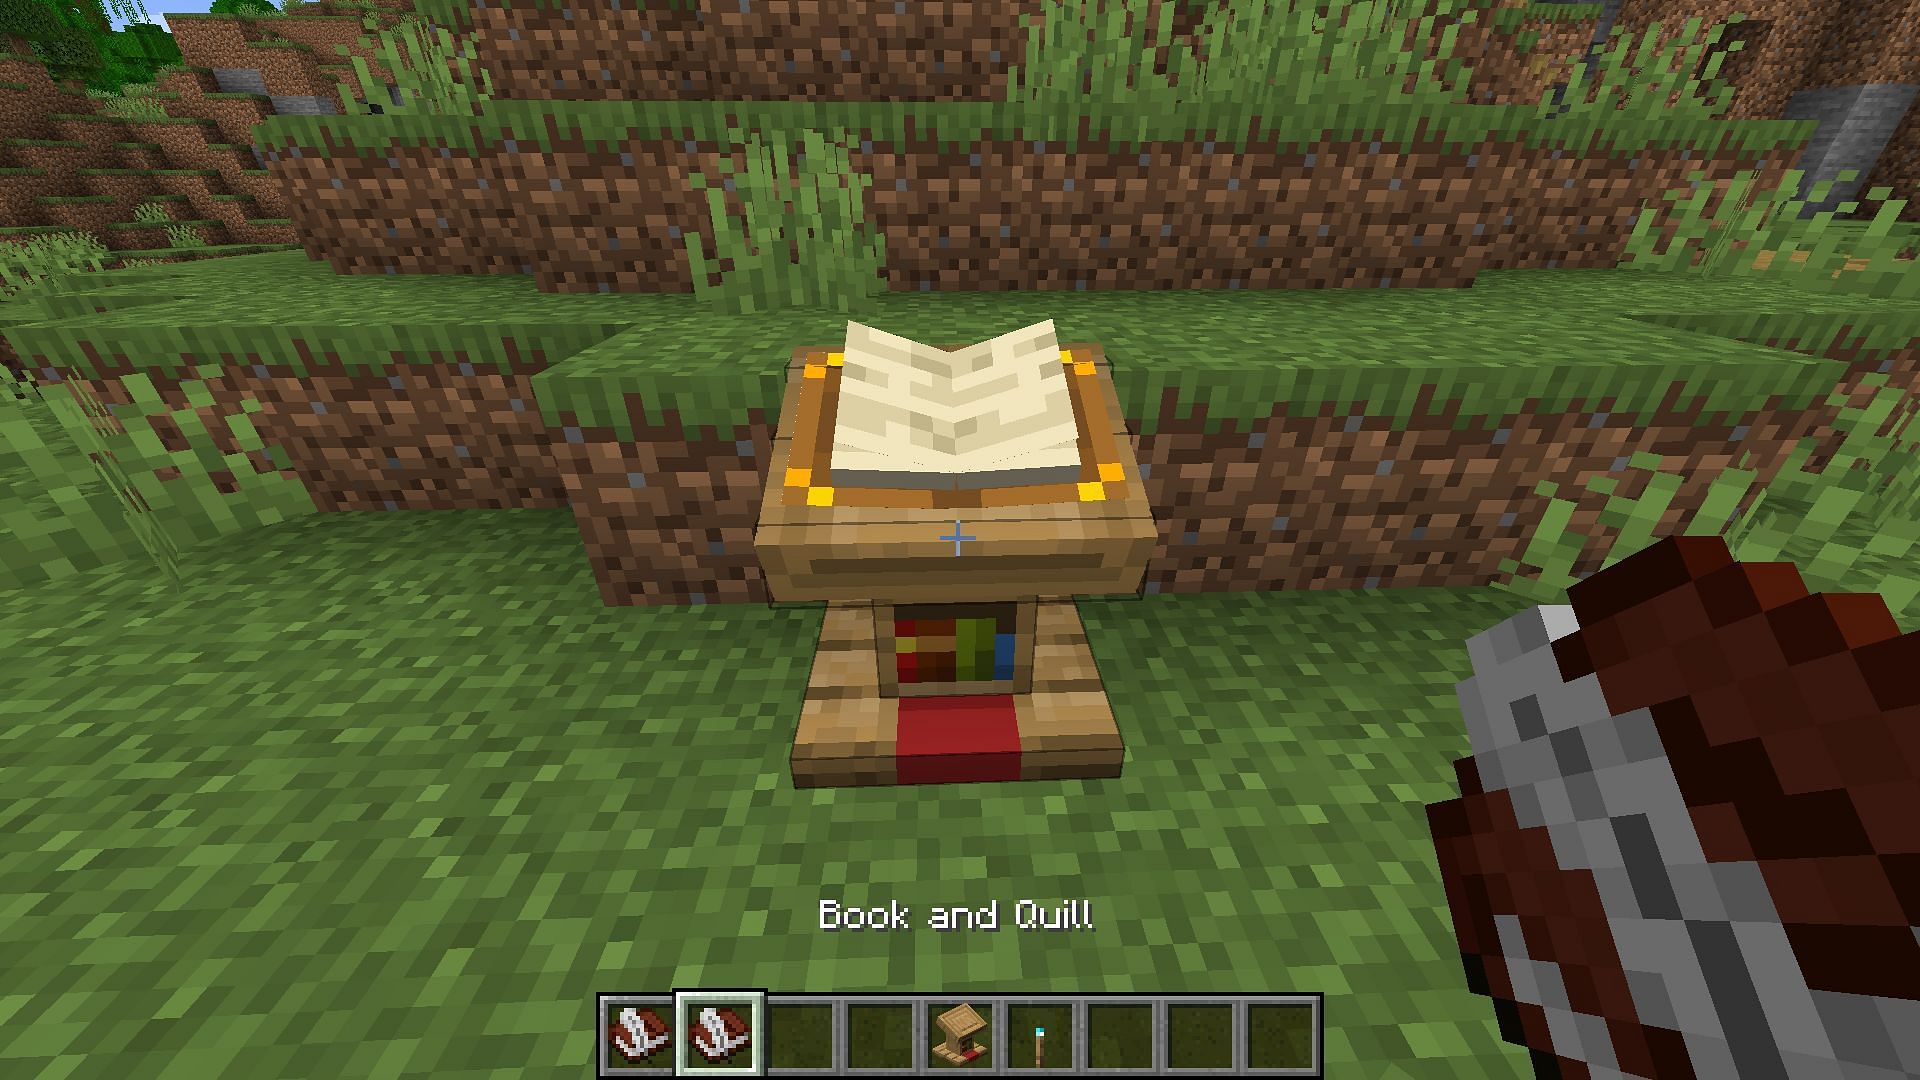 Redstone signal is emitted by the lectern (Image via Minecraft 1.19)